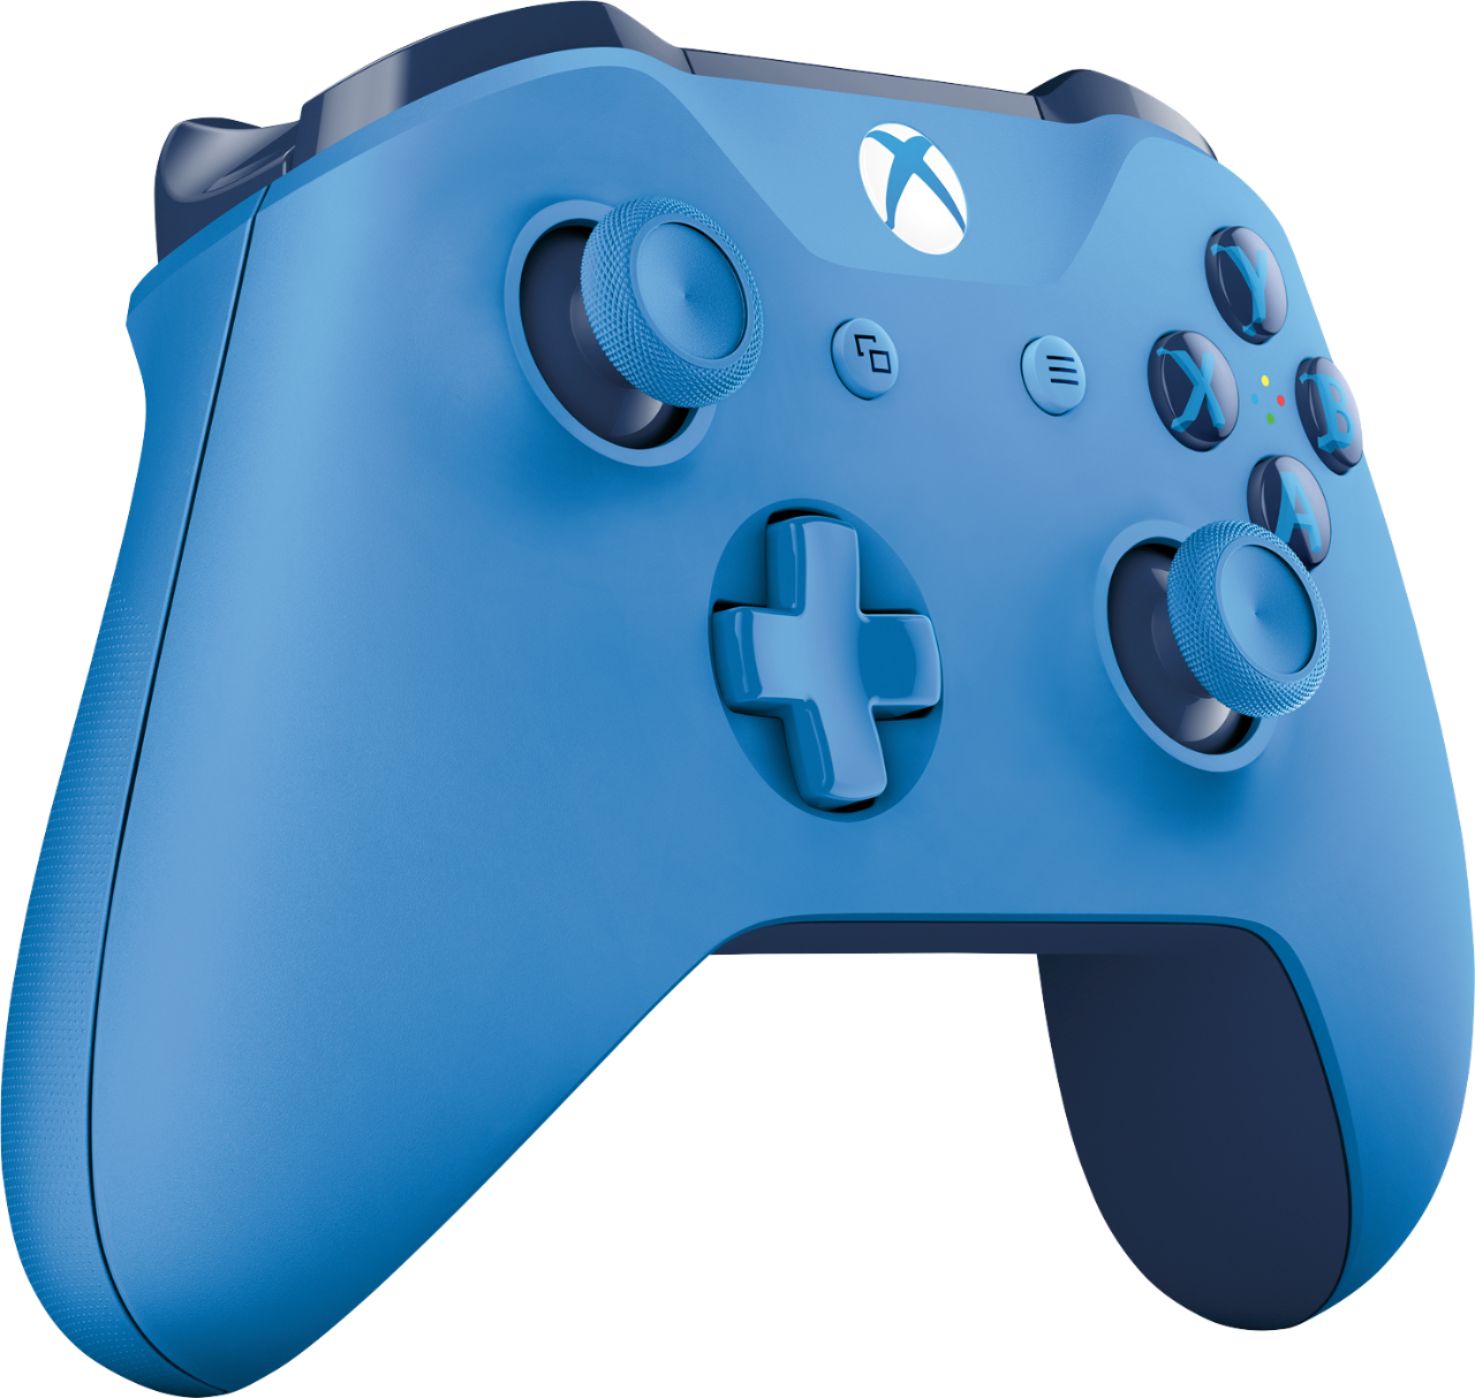 Angle View: Microsoft - Geek Squad Certified Refurbished Wireless Controller for Xbox One and Windows 10 - Blue